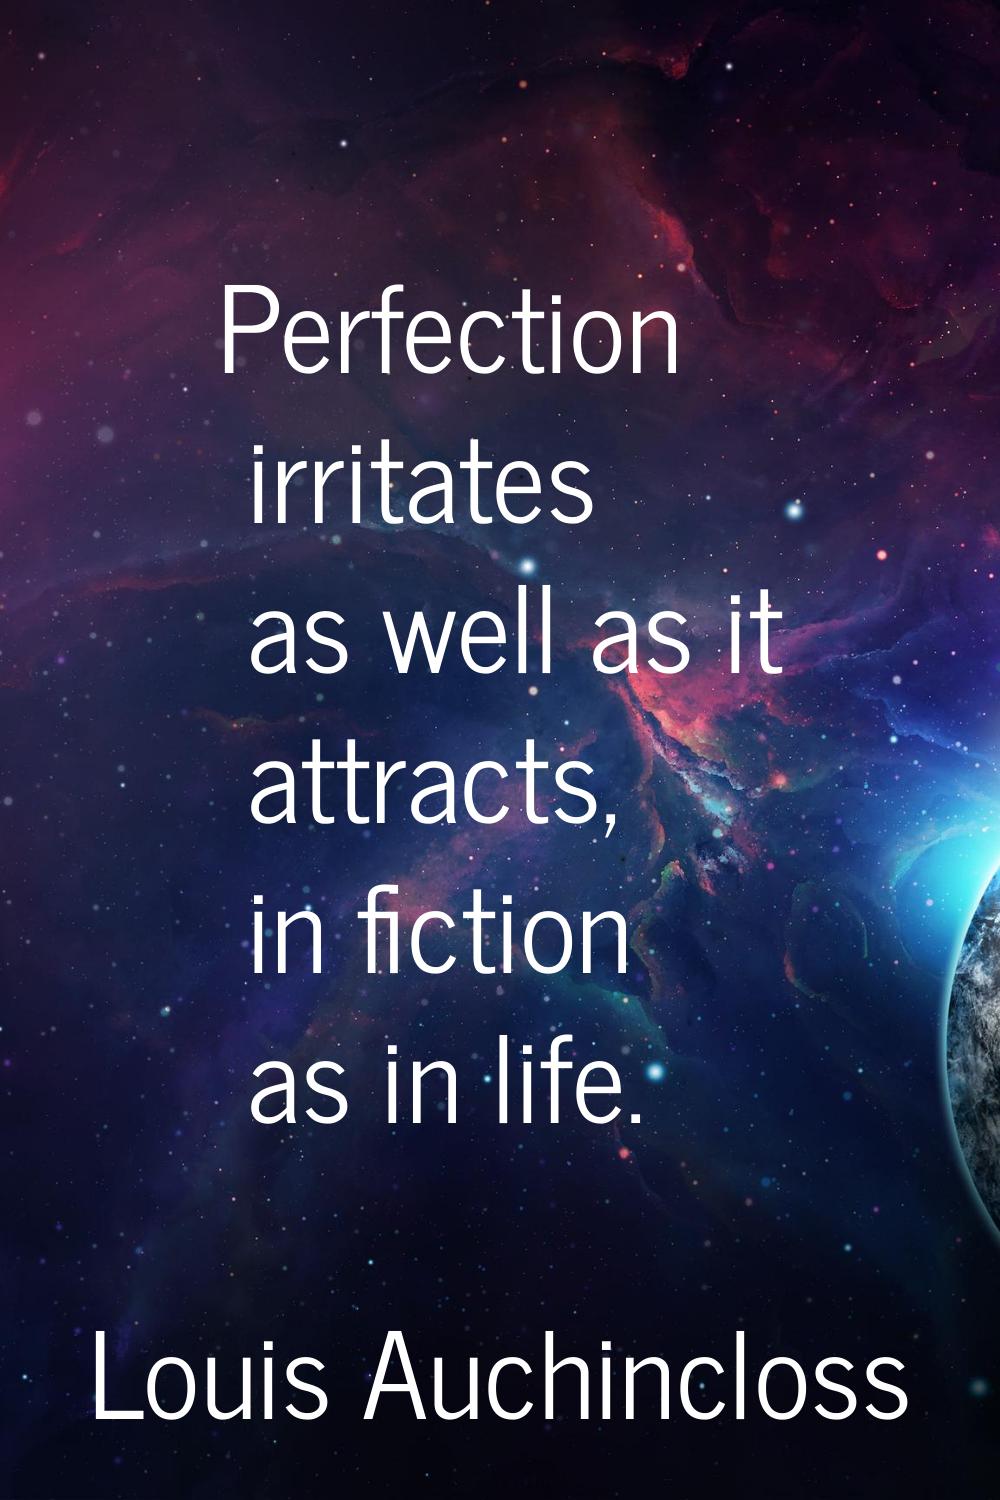 Perfection irritates as well as it attracts, in fiction as in life.